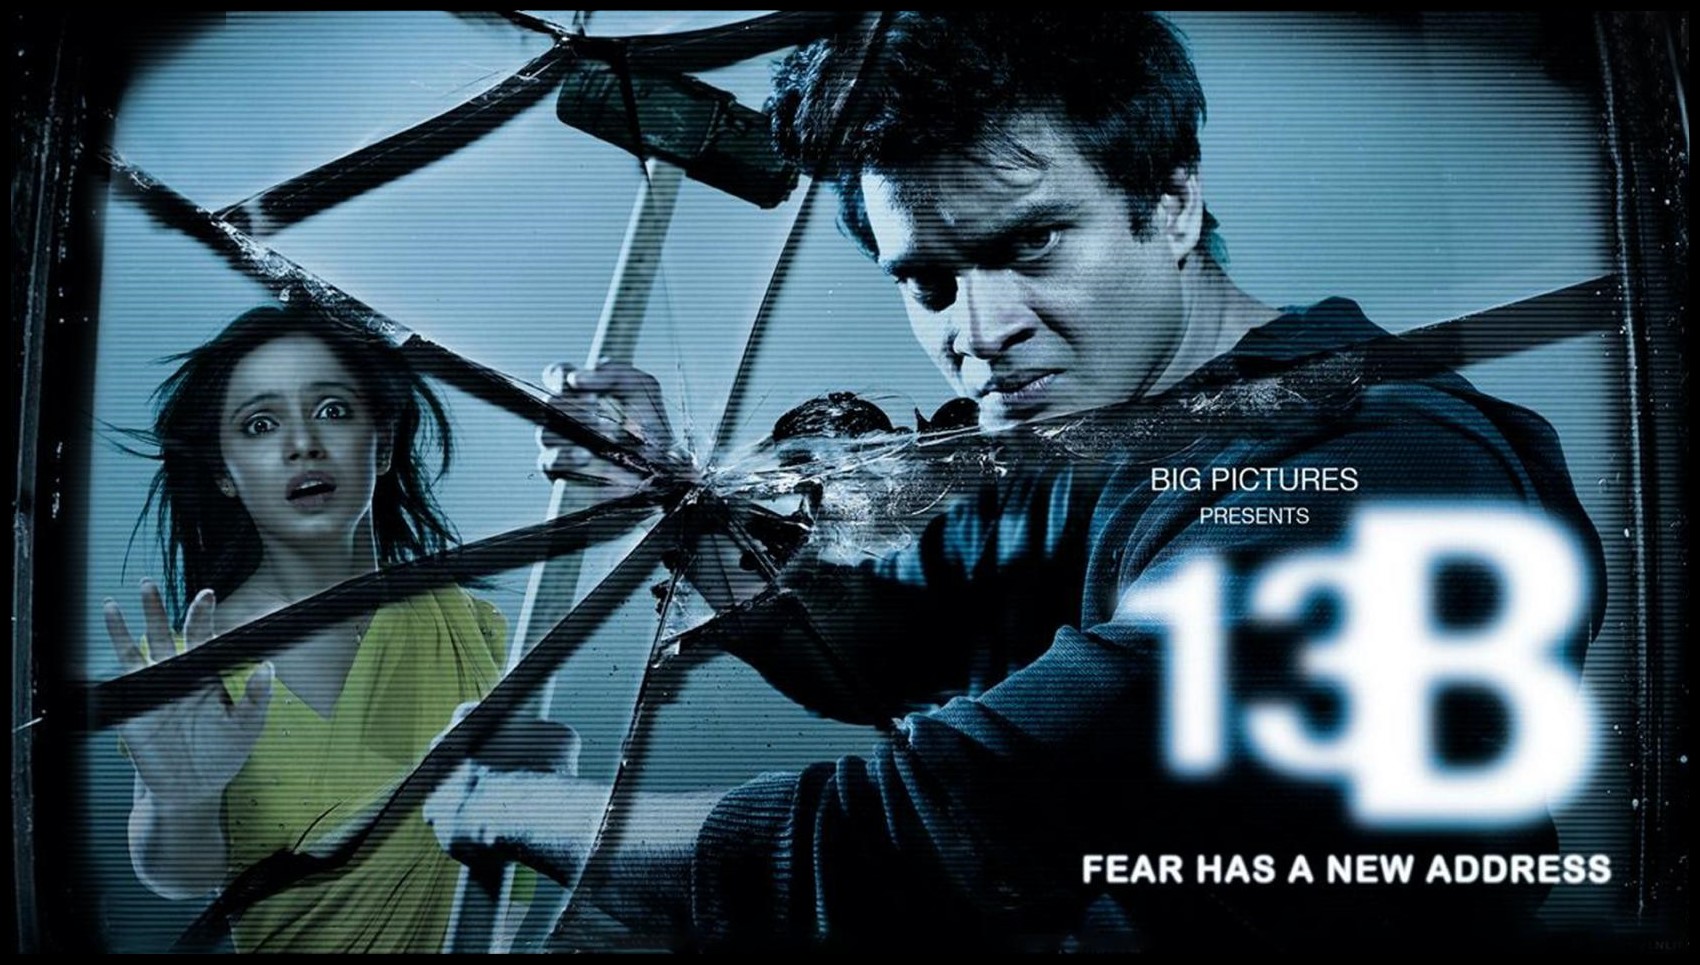 Must Watch Horror Movies: 13B: Fear Has a New Address - Obsession and Justice